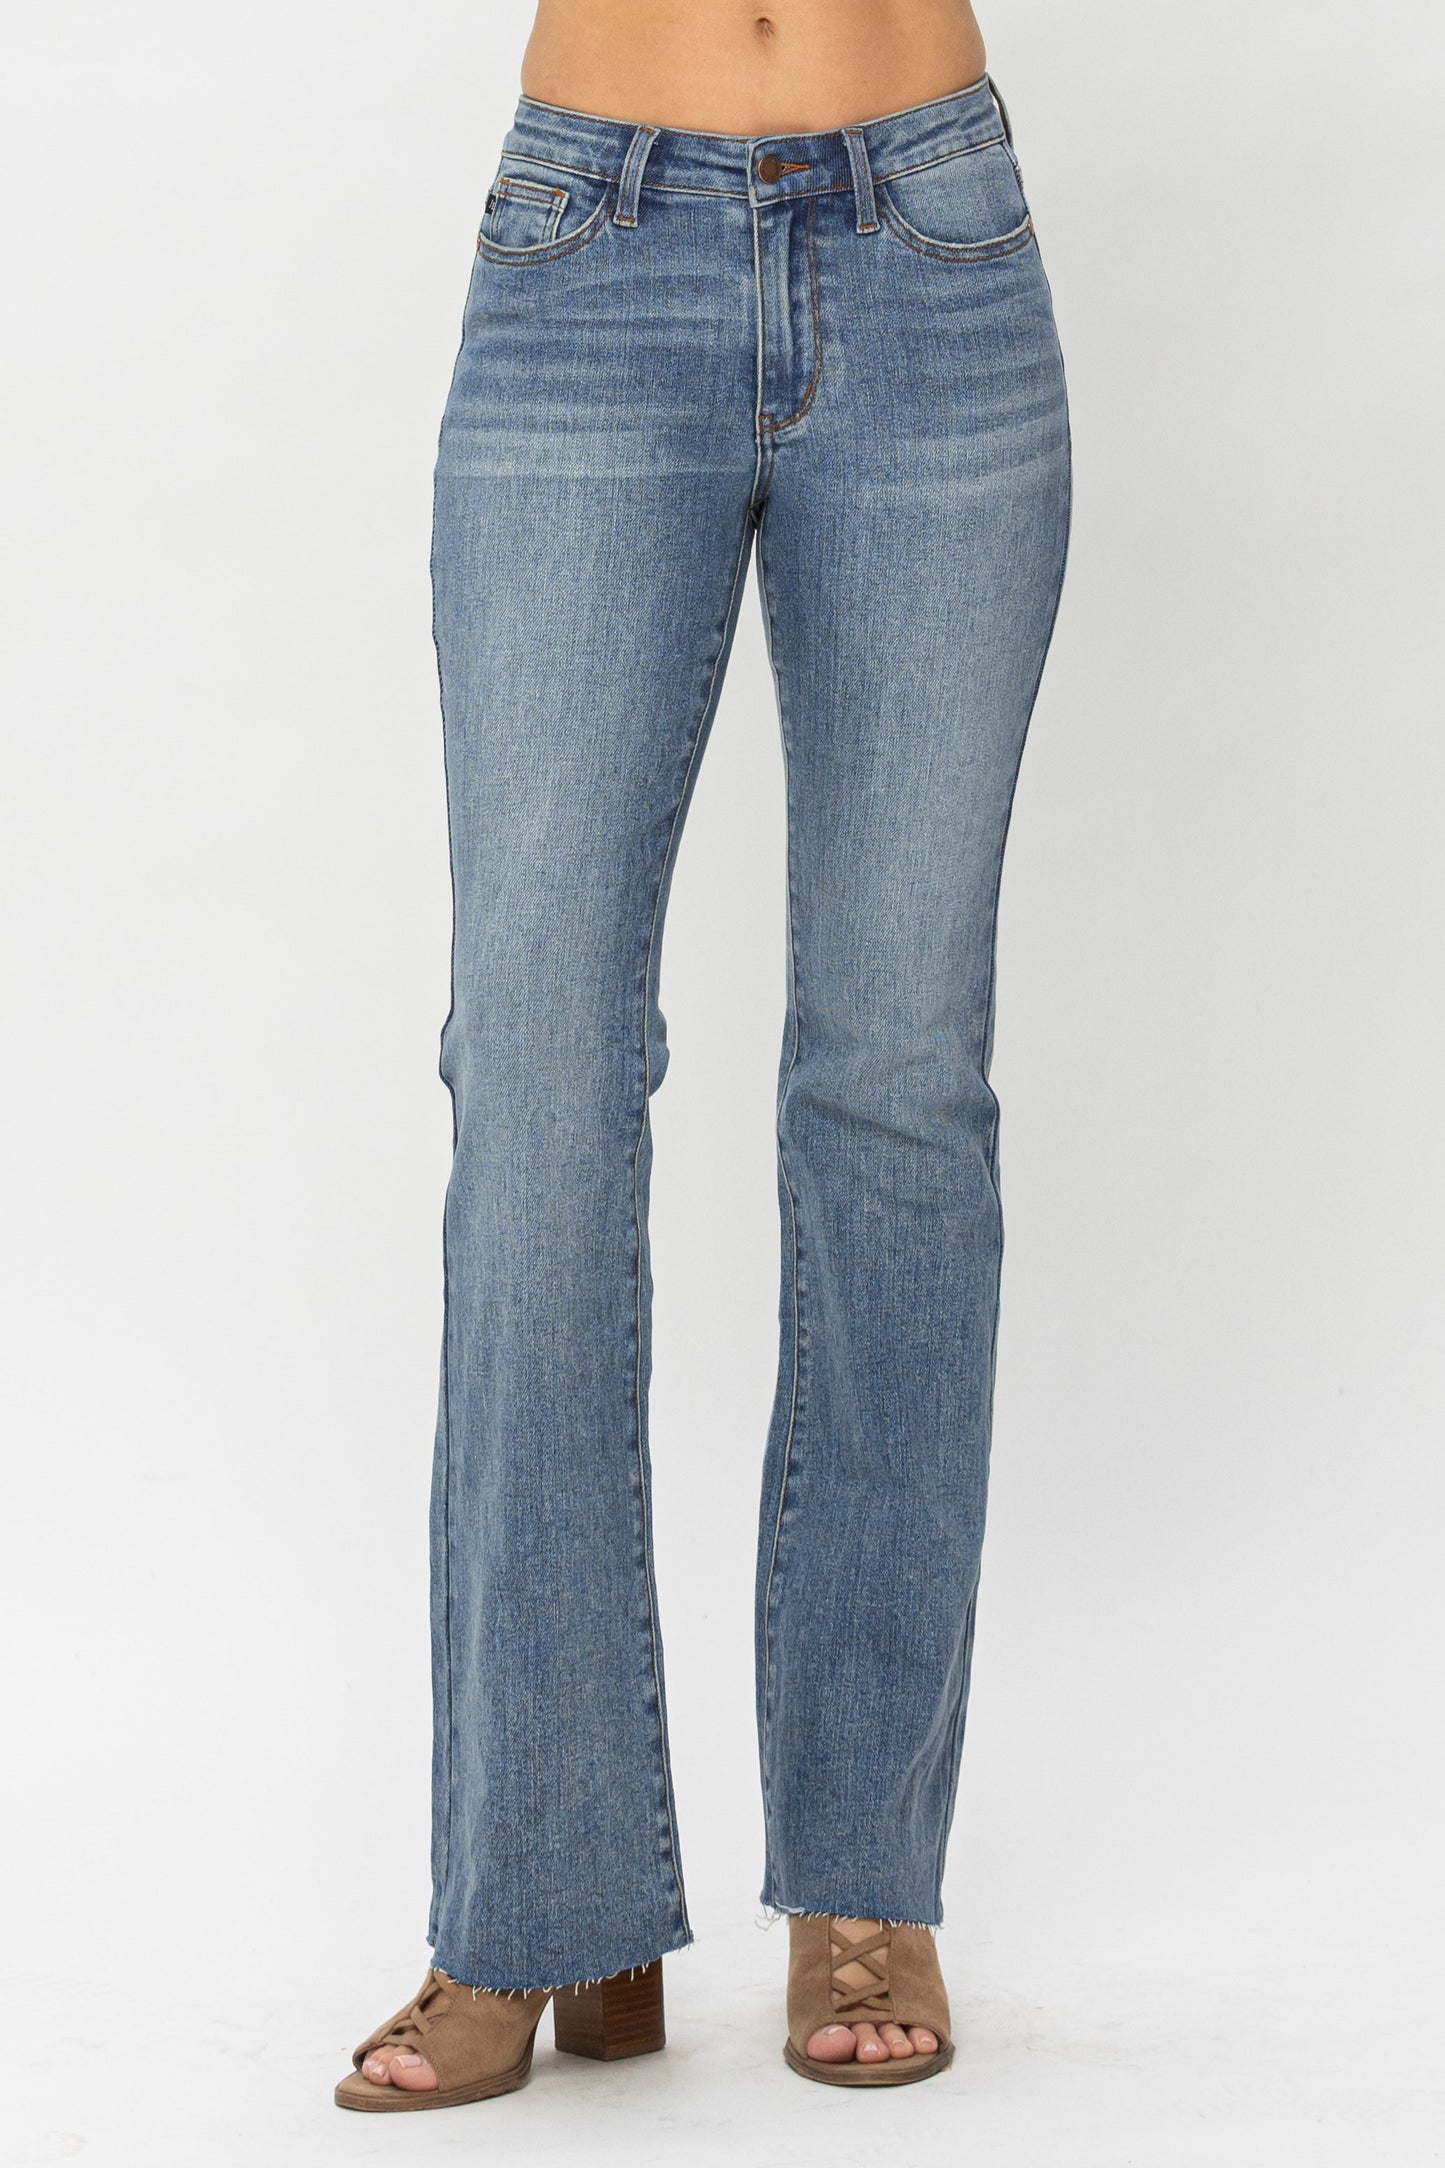 Cambio Norah Straight Pants Women's Size 4 Blue Jeans Style 00664